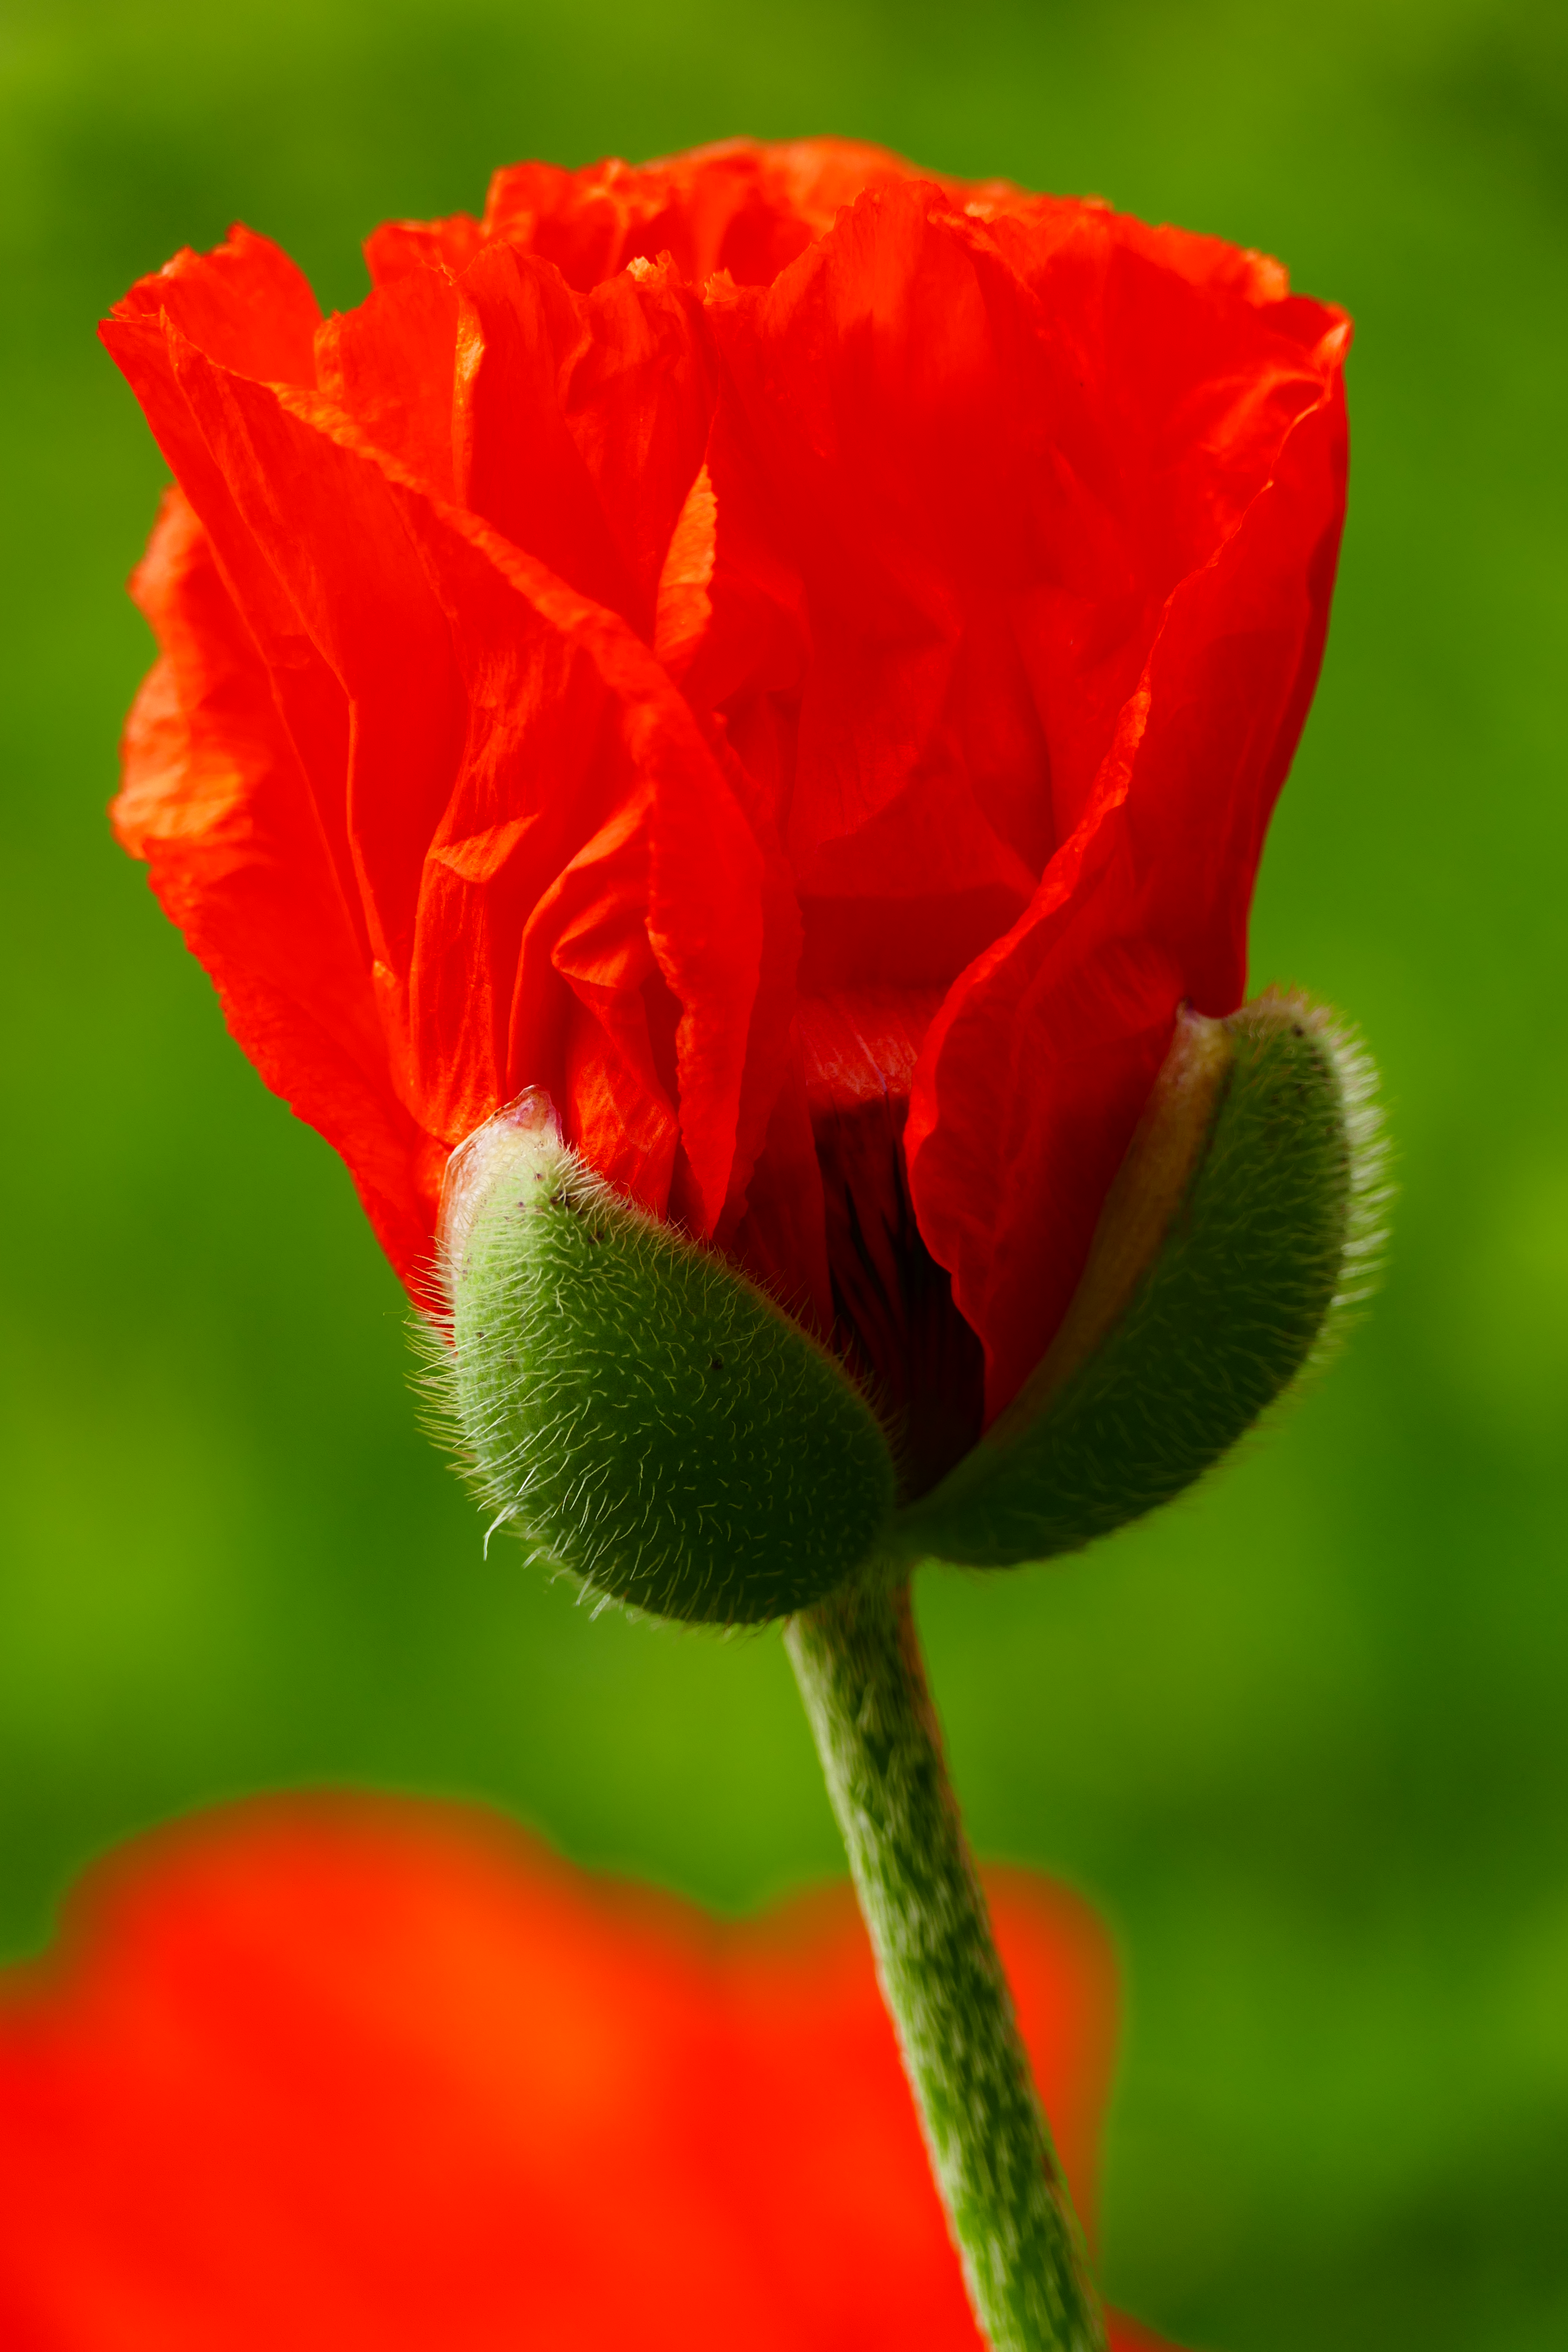 Extreme close up of red poppy emerging from bud - Arboretum